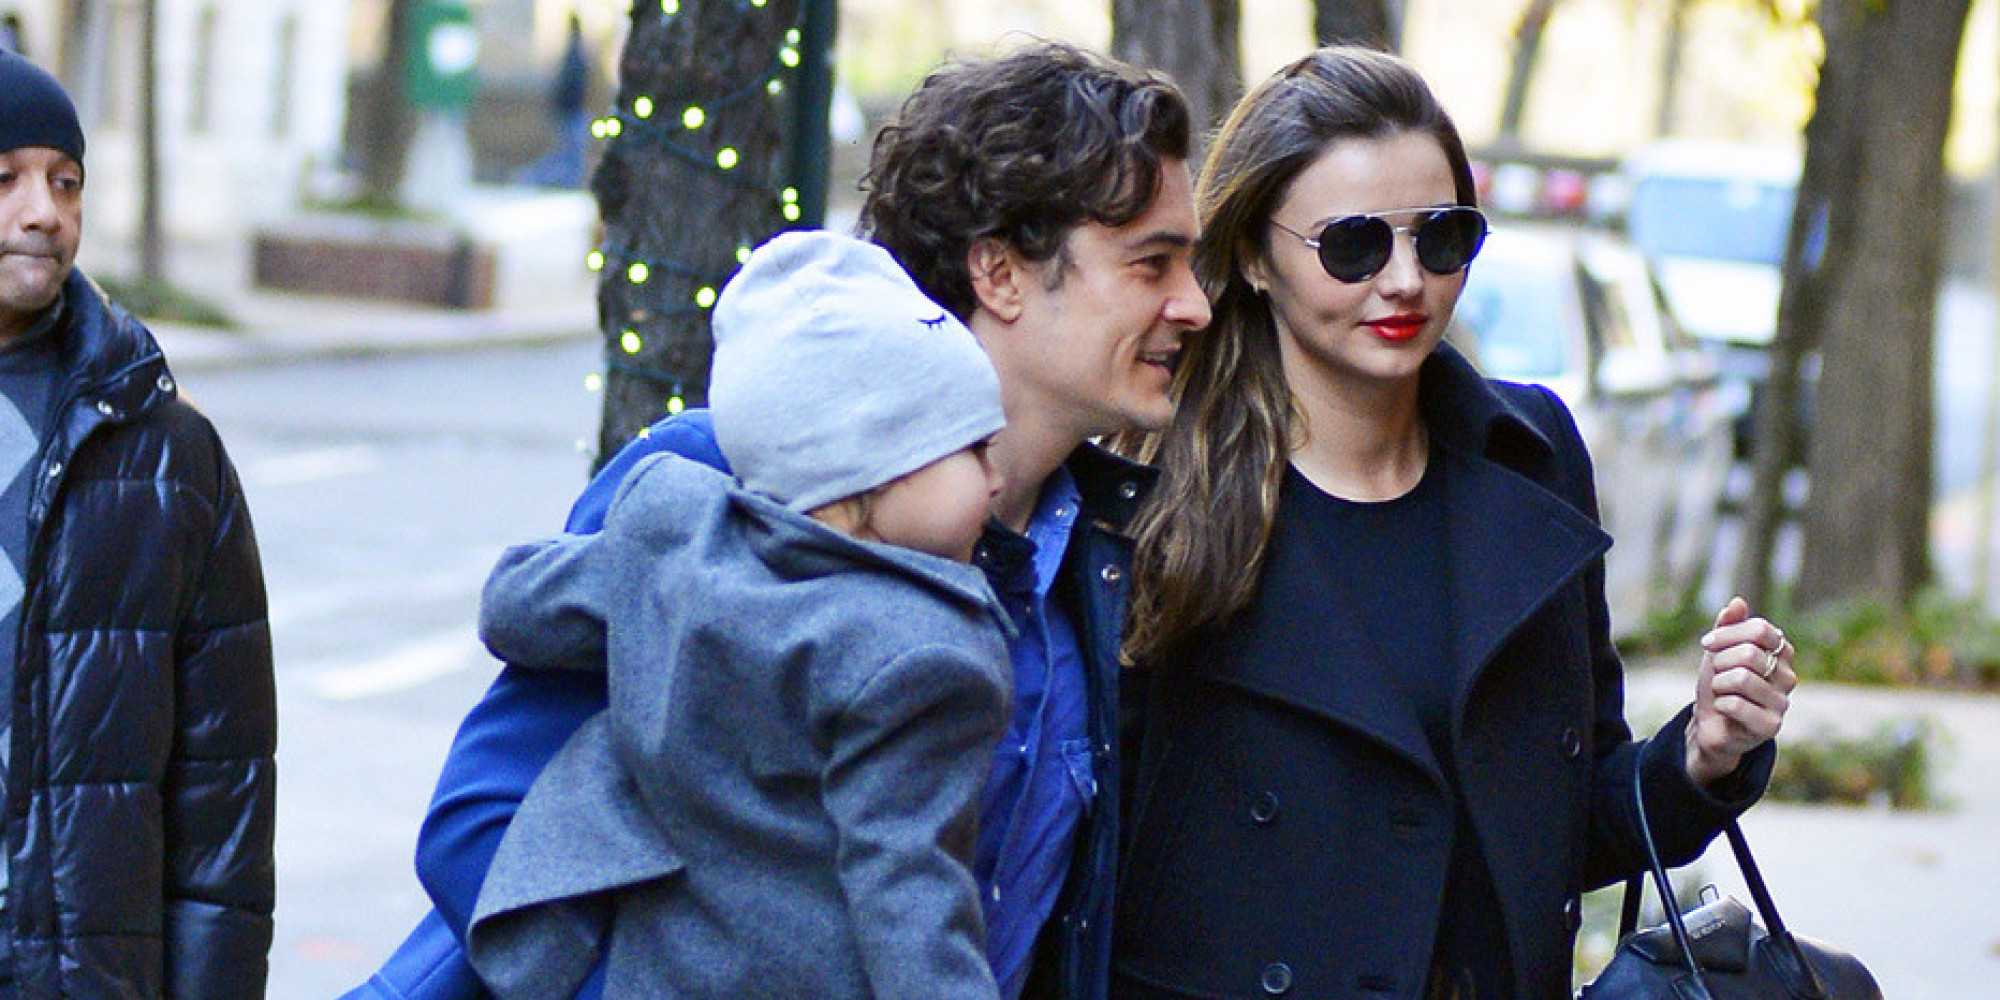 Orlando Bloom And Miranda Kerr Reunite In NYC With Son Flynn | HuffPost